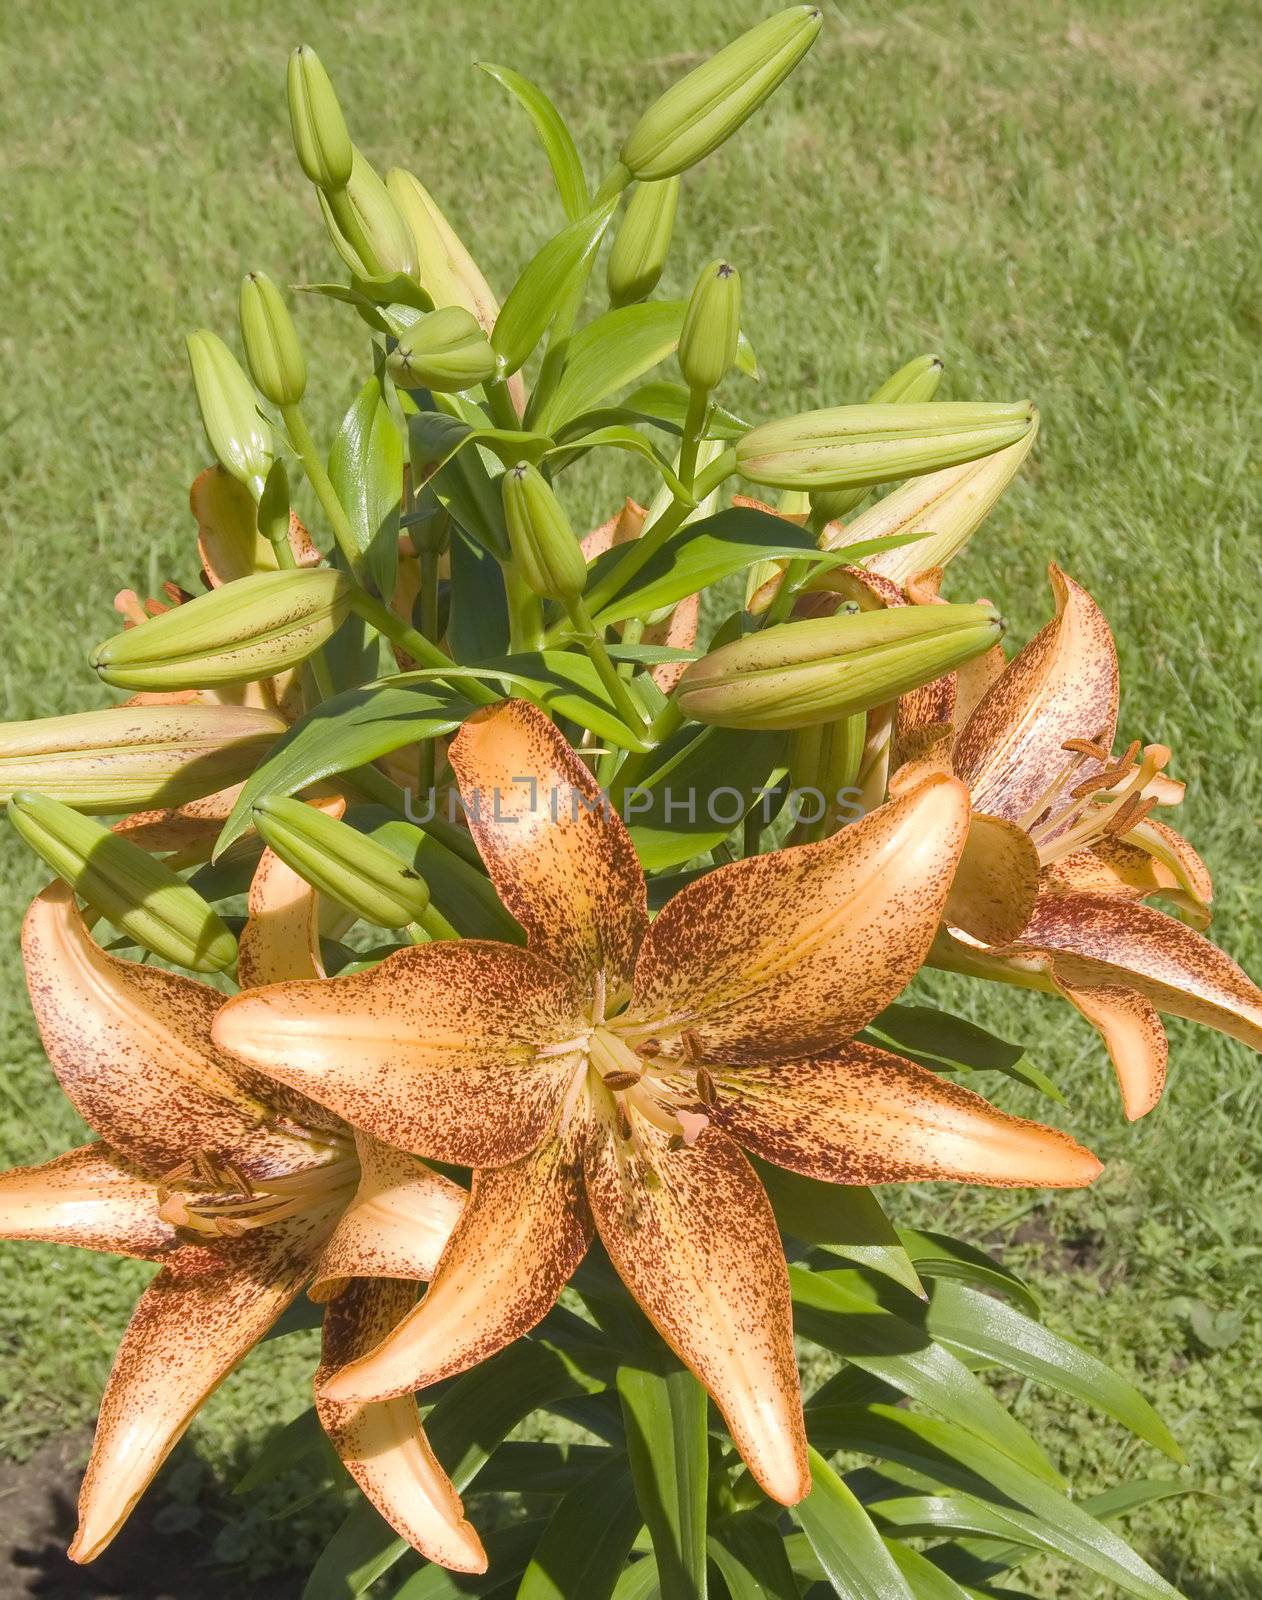 Variegated lilly in the sunlight in summer day